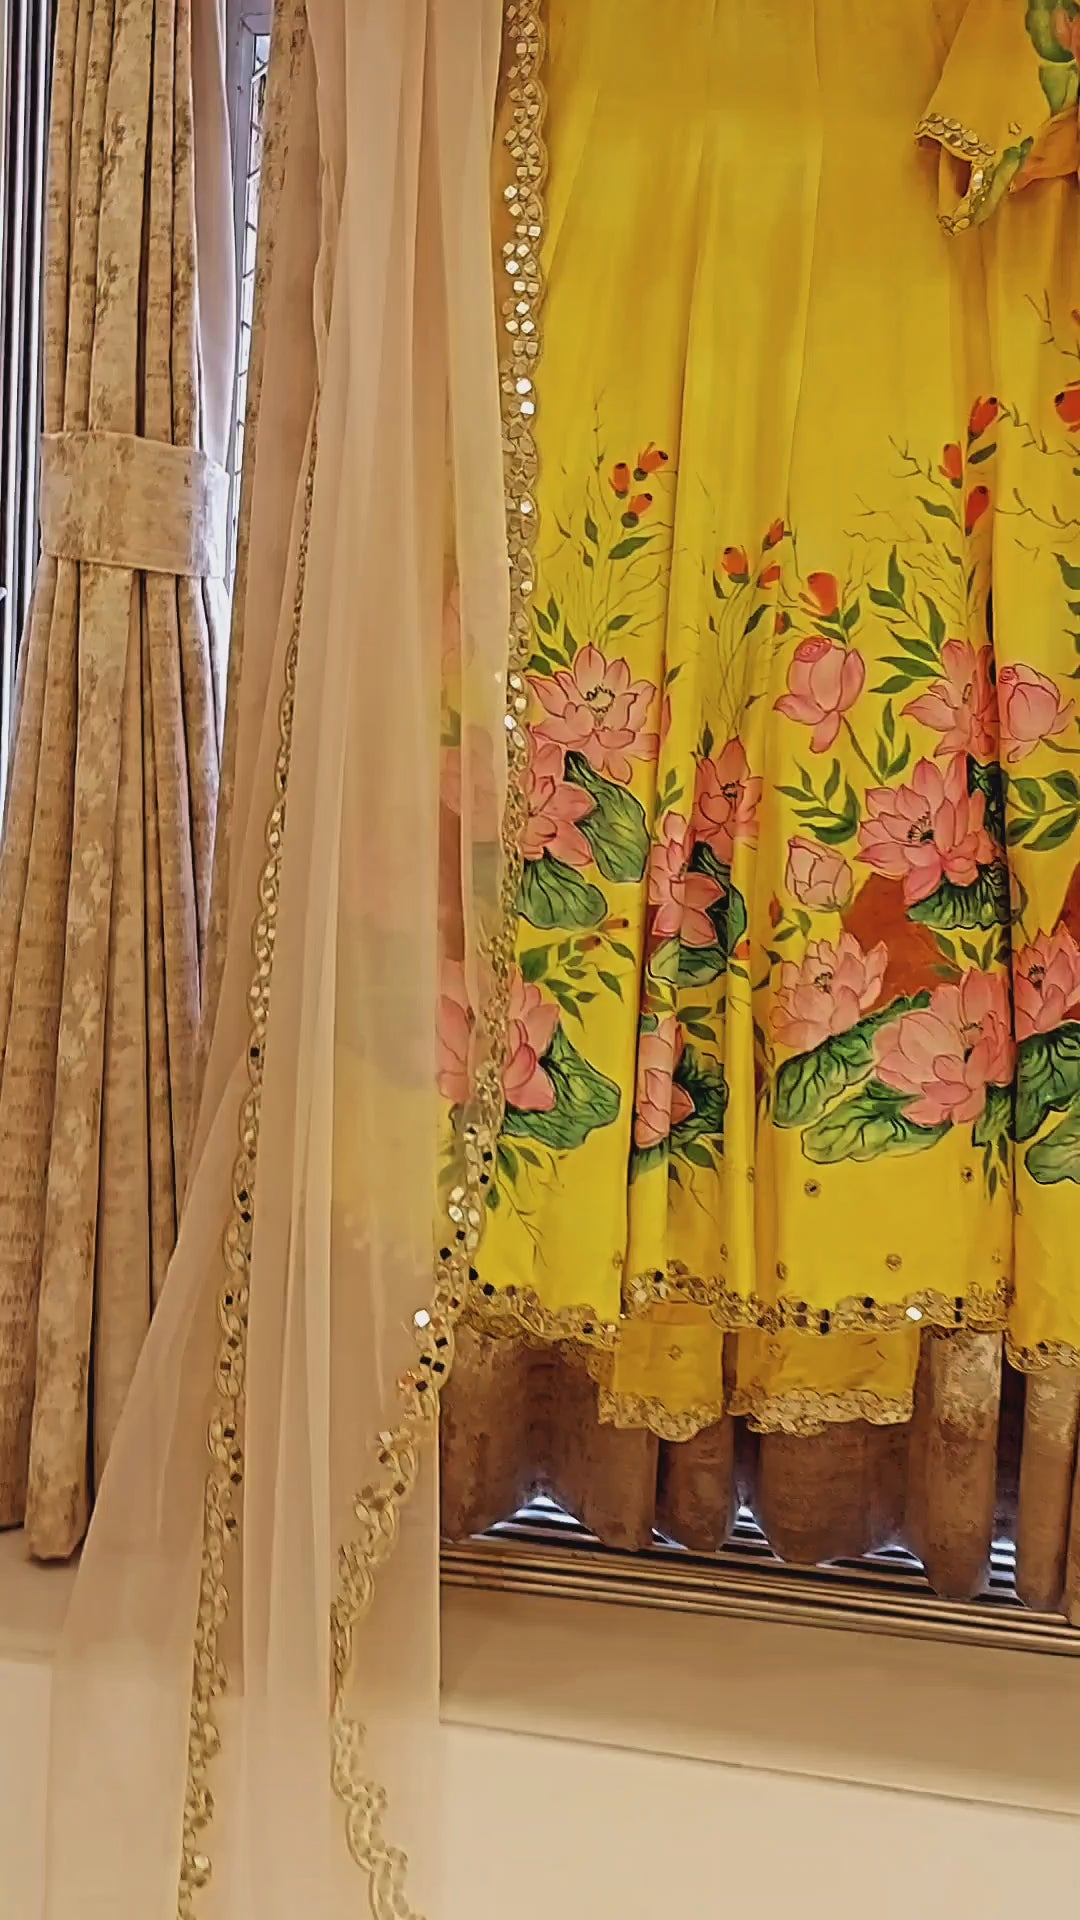 Handpainted unstitched 100% silk lehenga and blouse with lotuses on a golden yellow background